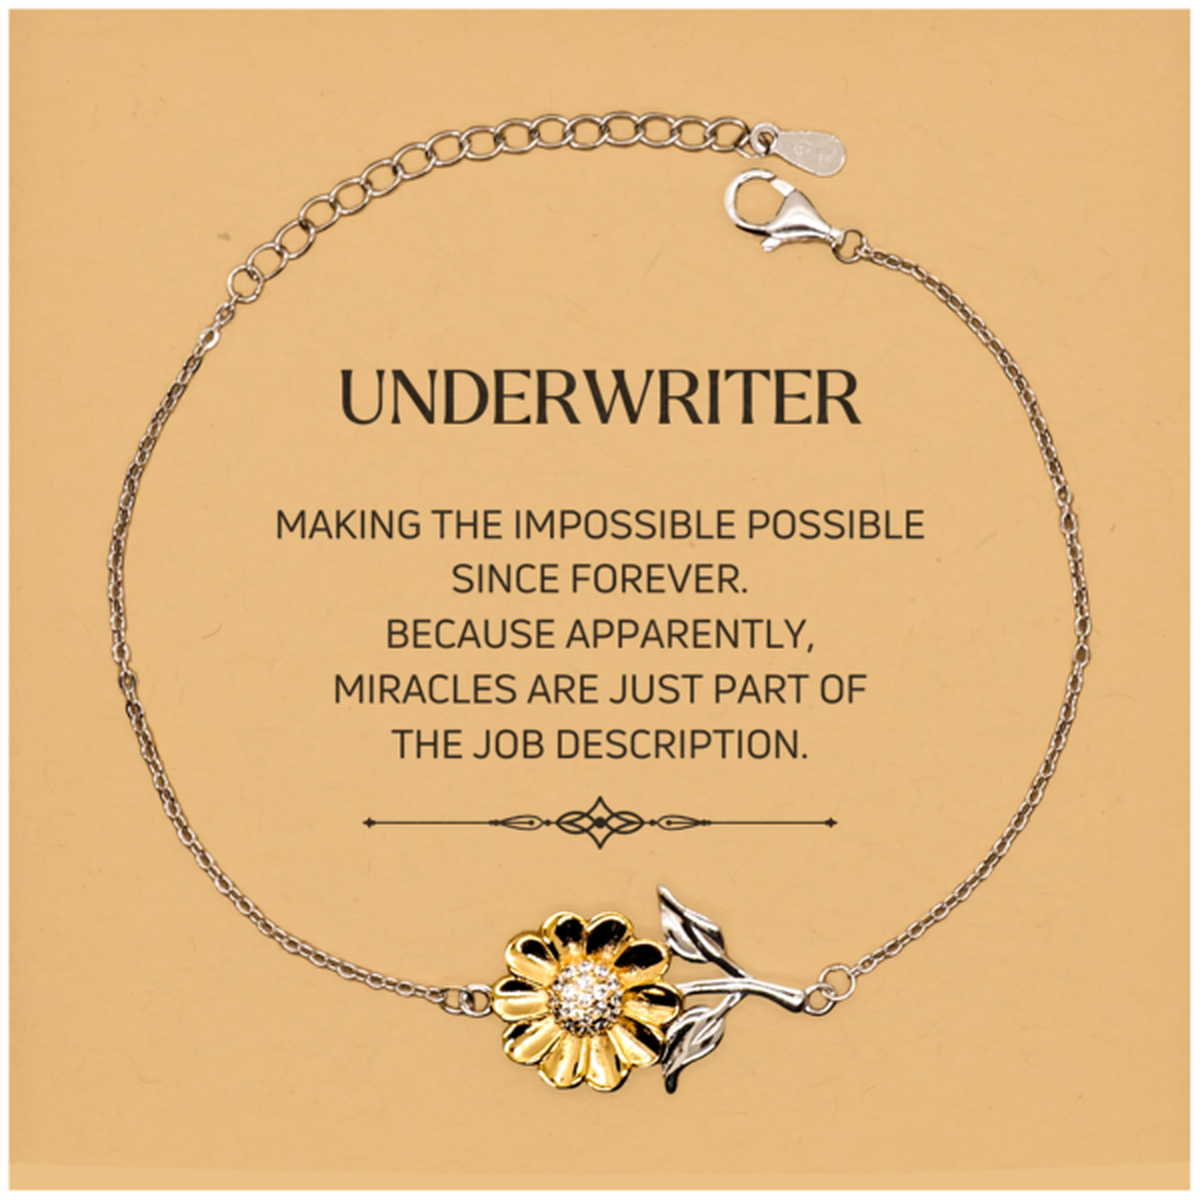 Funny Underwriter Gifts, Miracles are just part of the job description, Inspirational Birthday Christmas Sunflower Bracelet For Underwriter, Men, Women, Coworkers, Friends, Boss